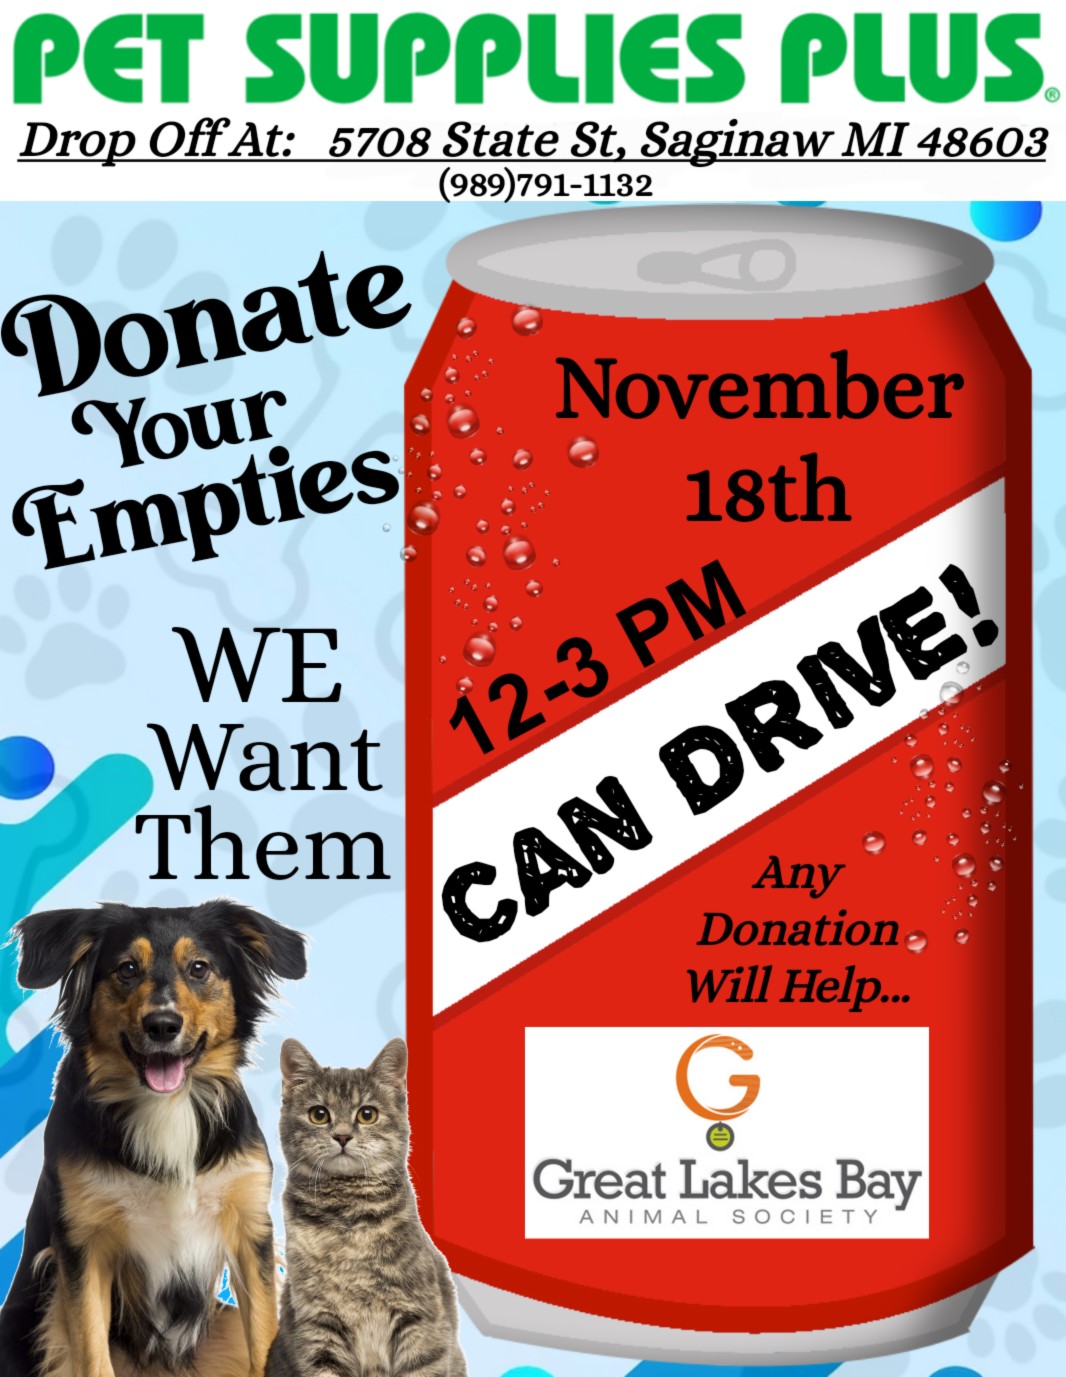 <h1 class="tribe-events-single-event-title">Great Lakes Bay Animal Society Can Drive!</h1>